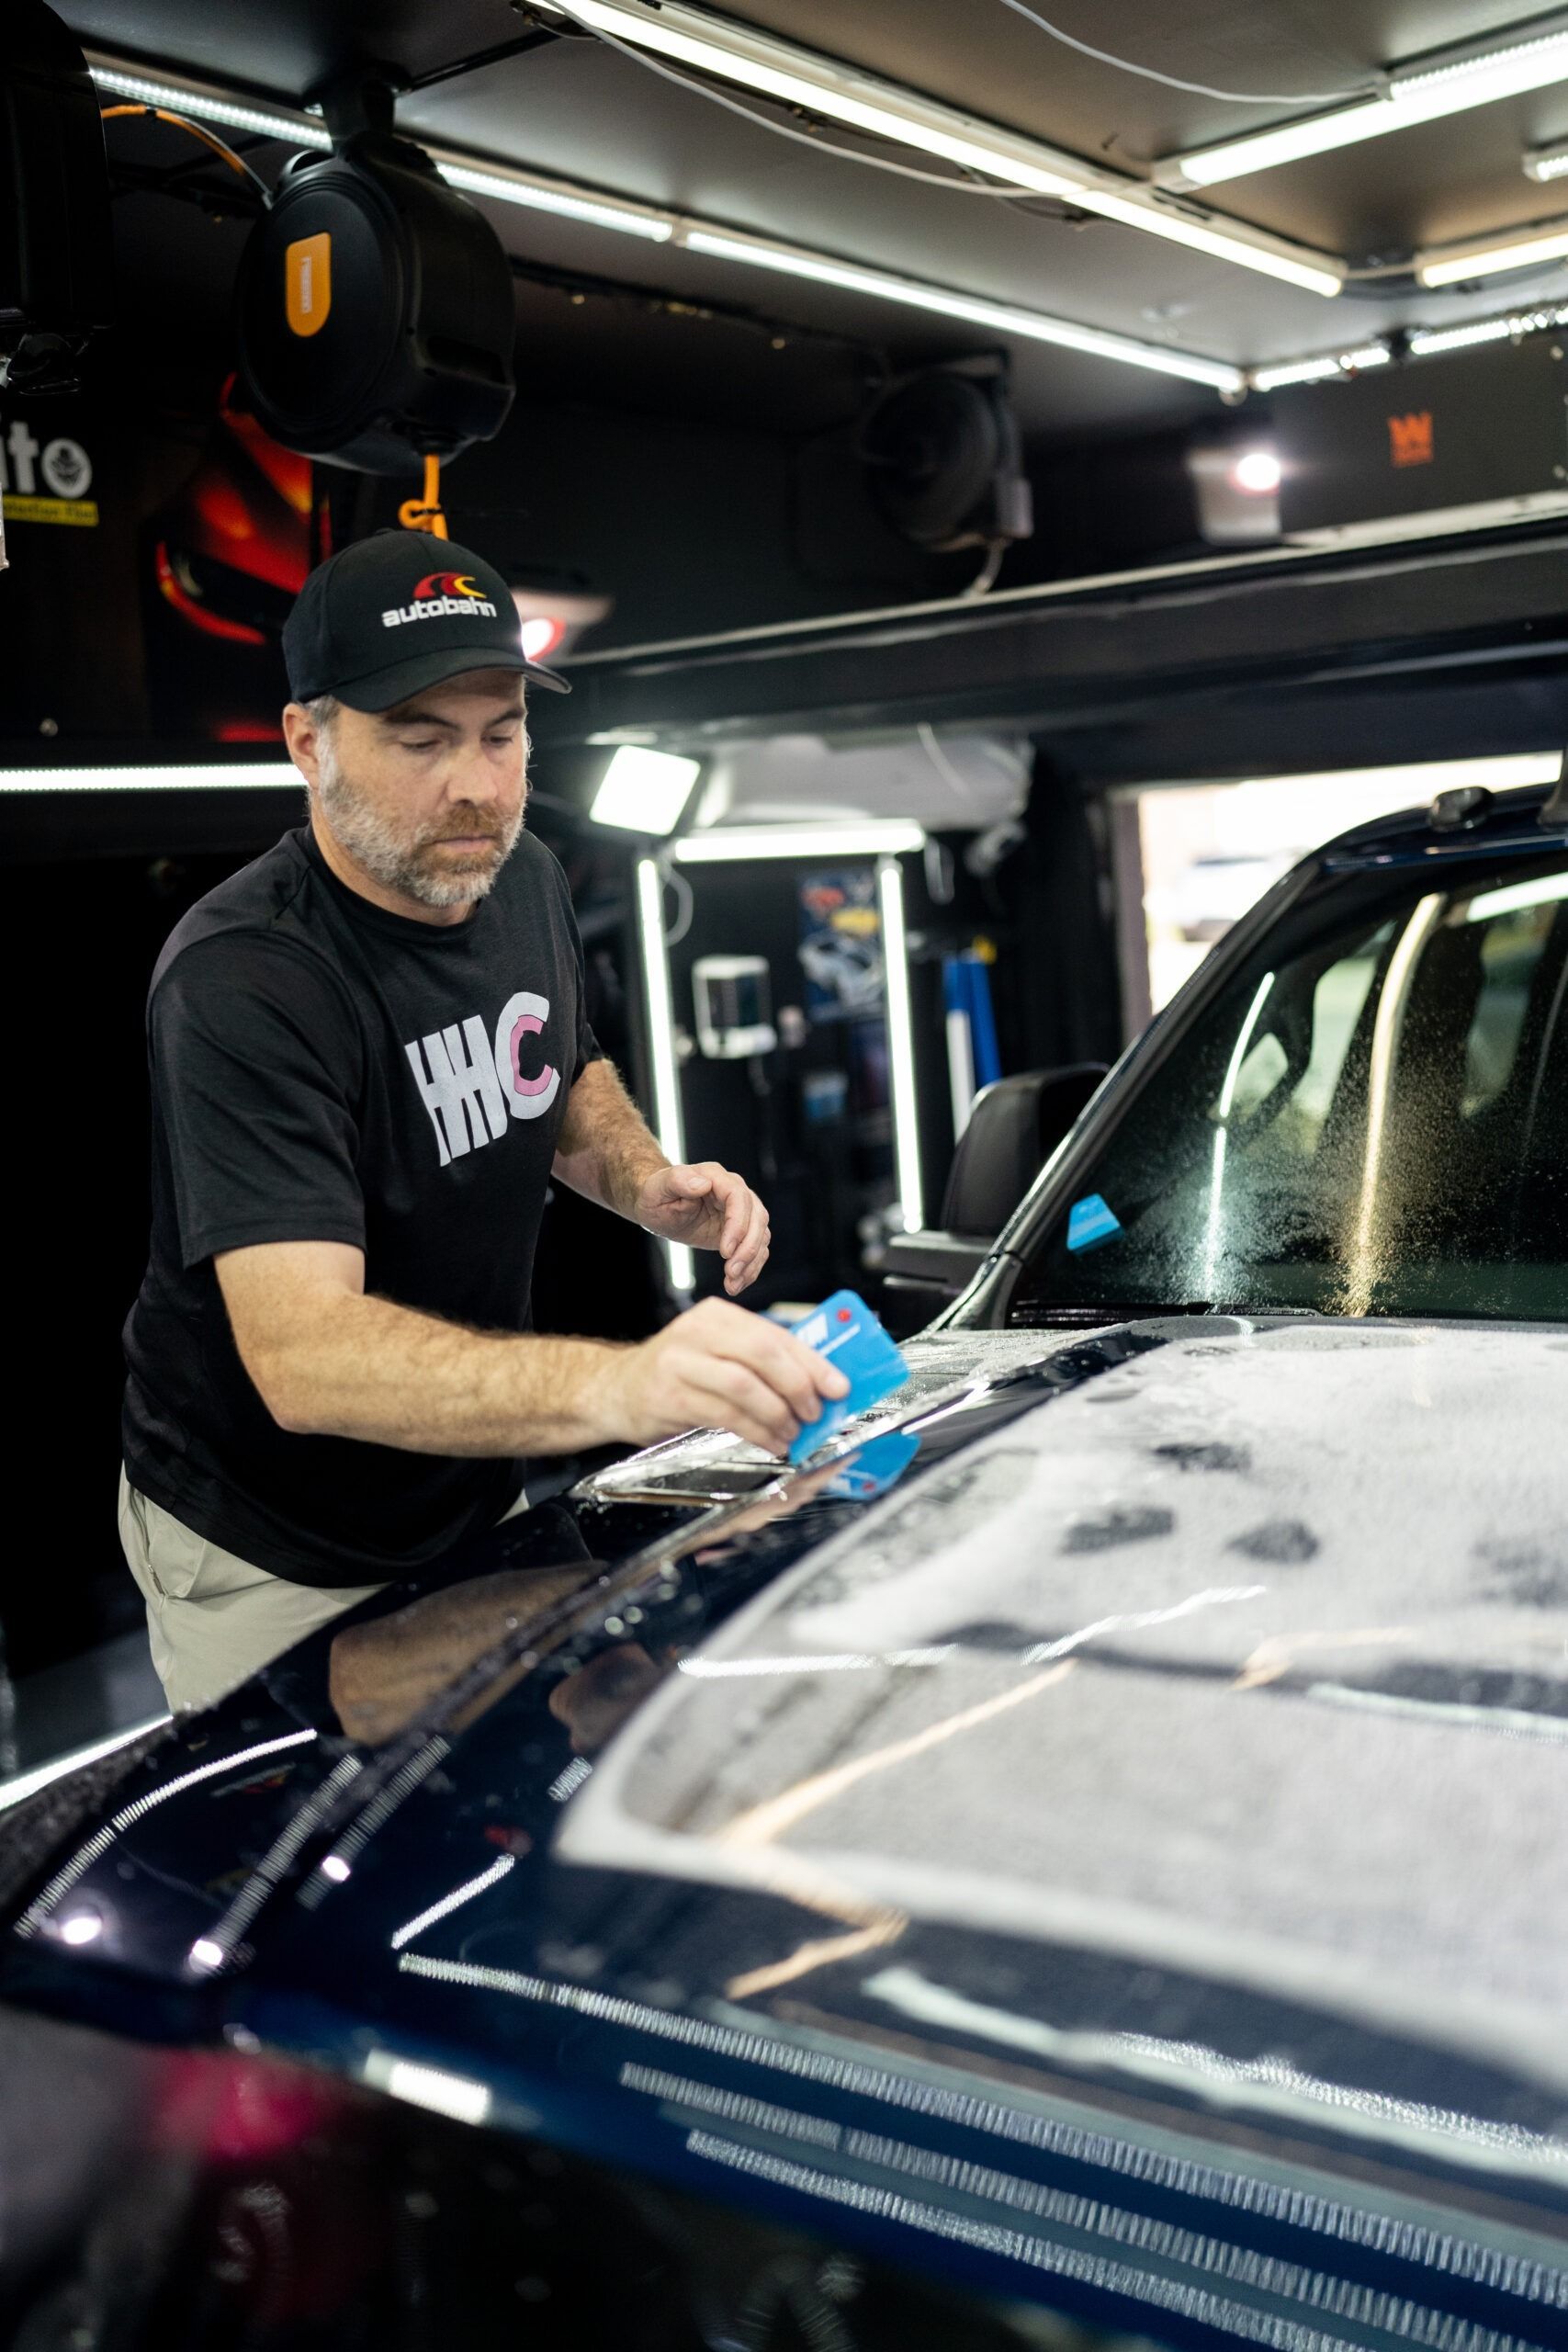 A man is cleaning the hood of a car in a garage.